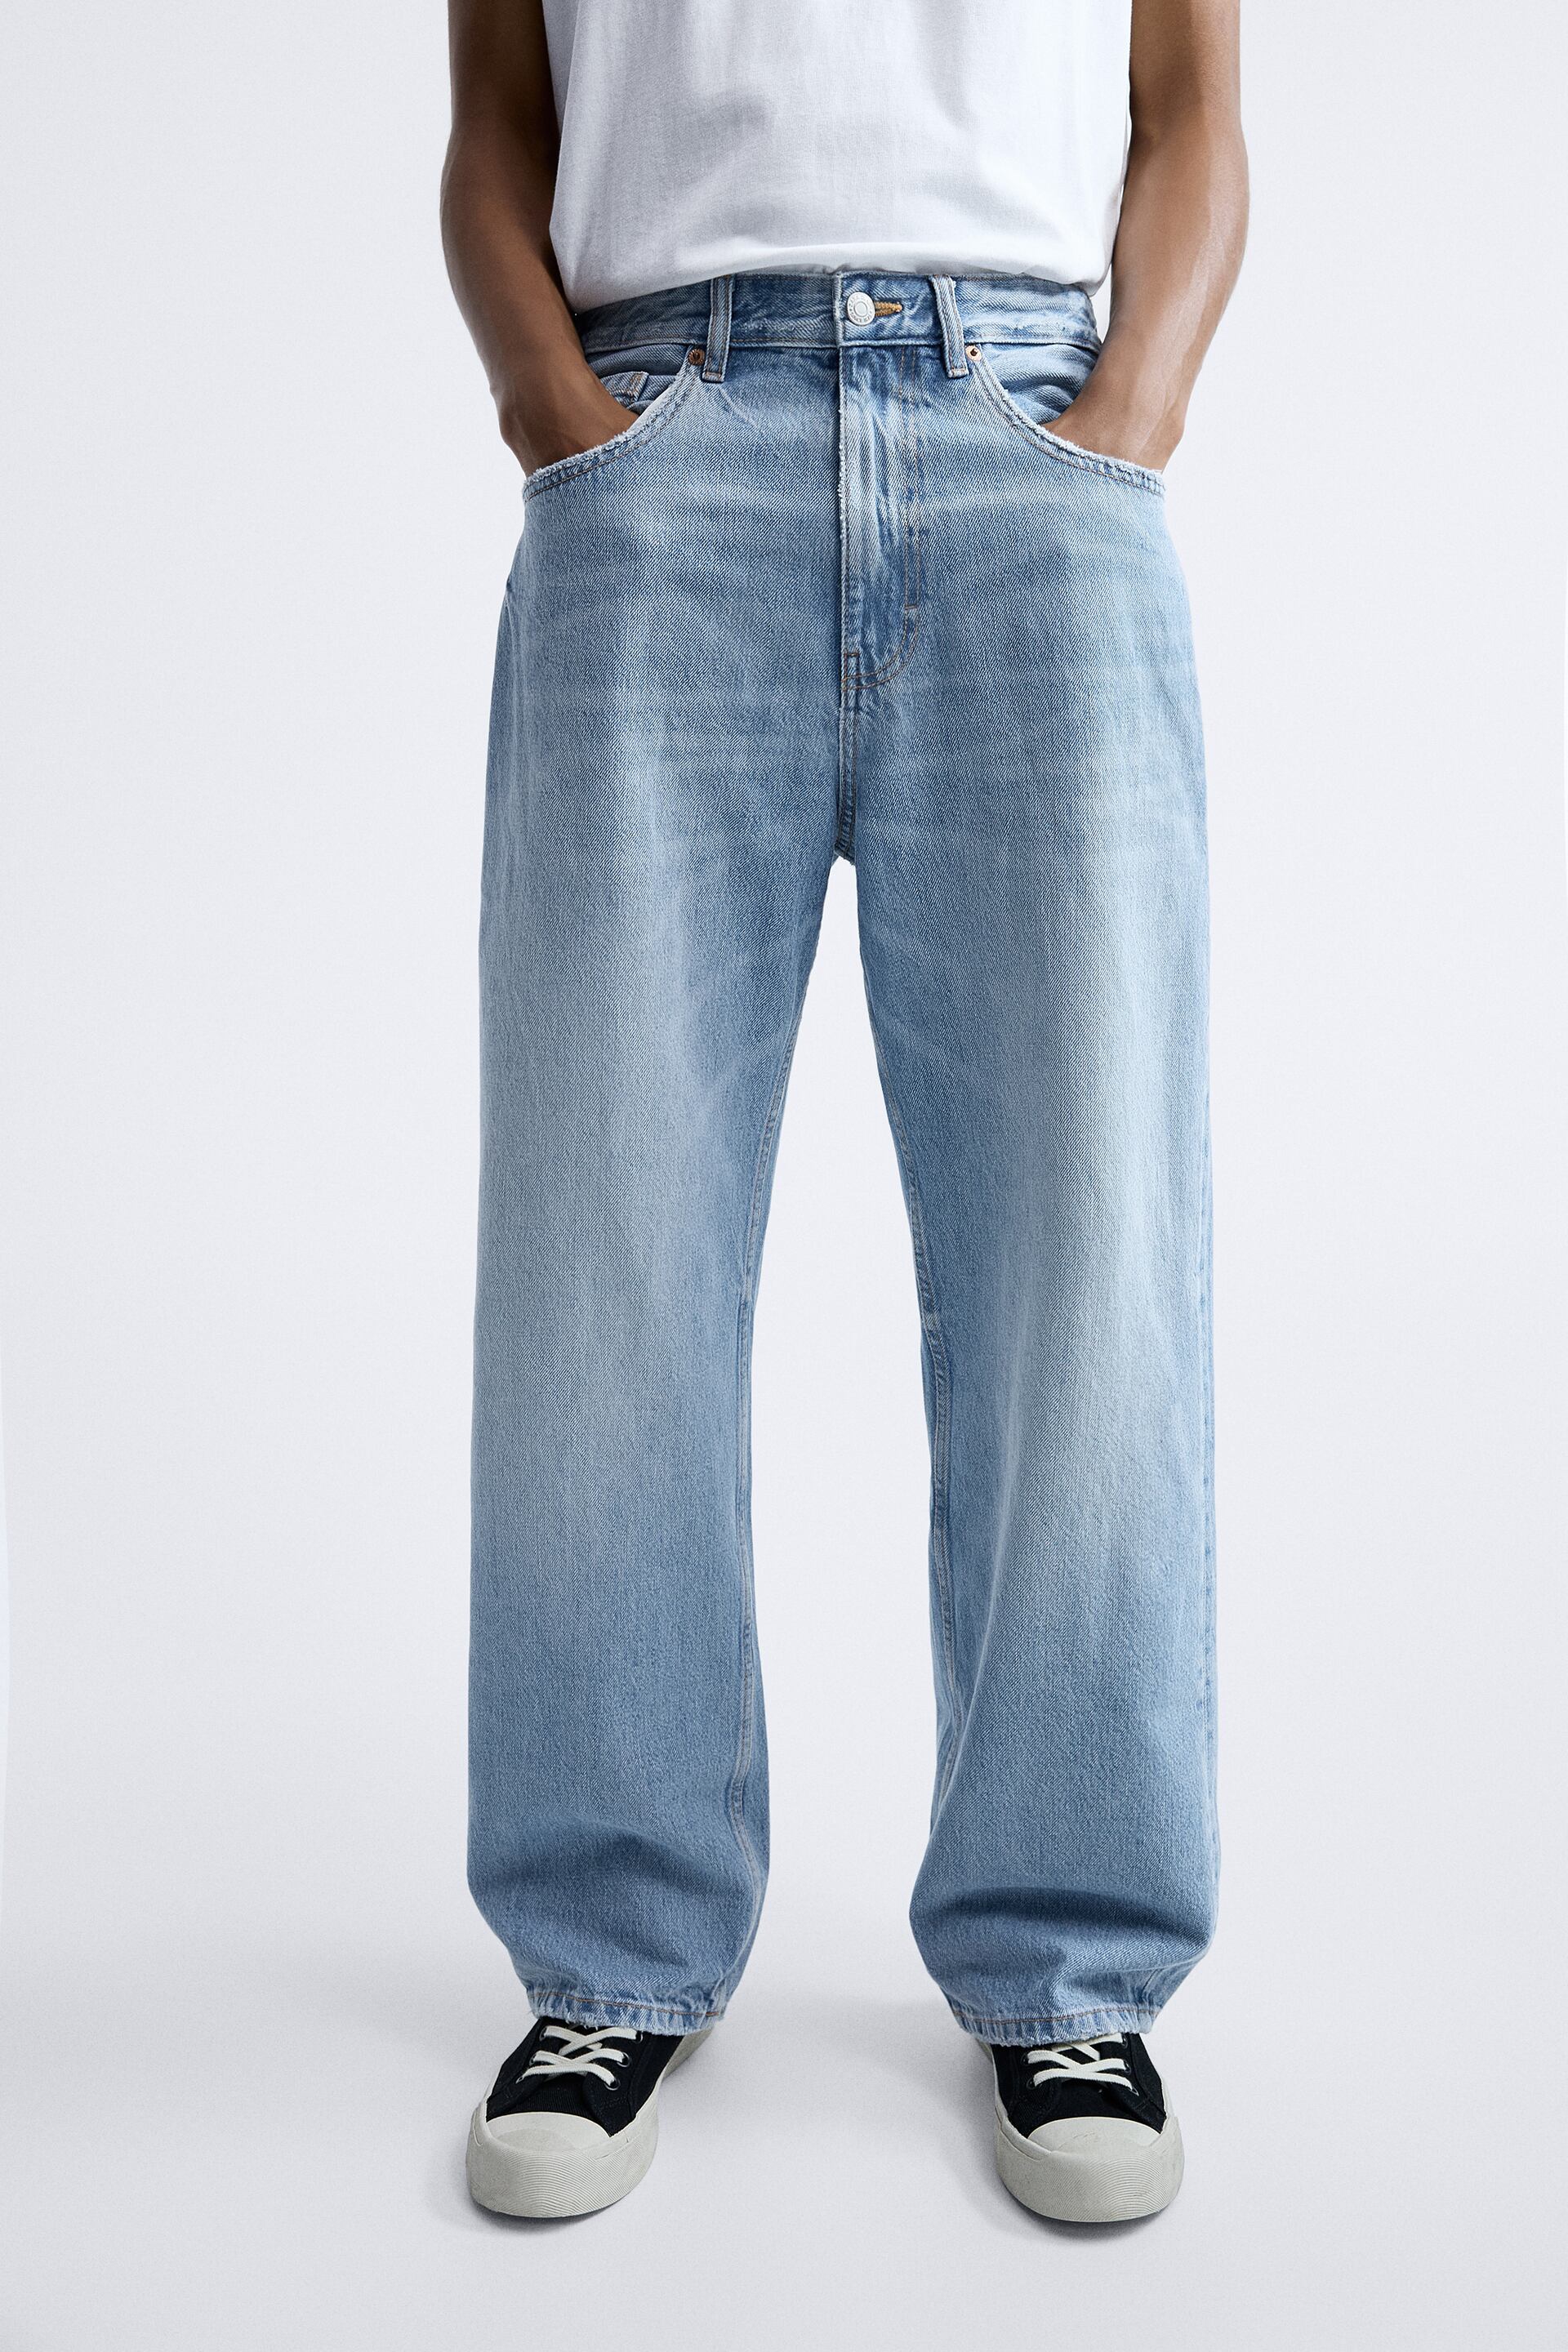 JEANS BAGGY FIT - Azul claro